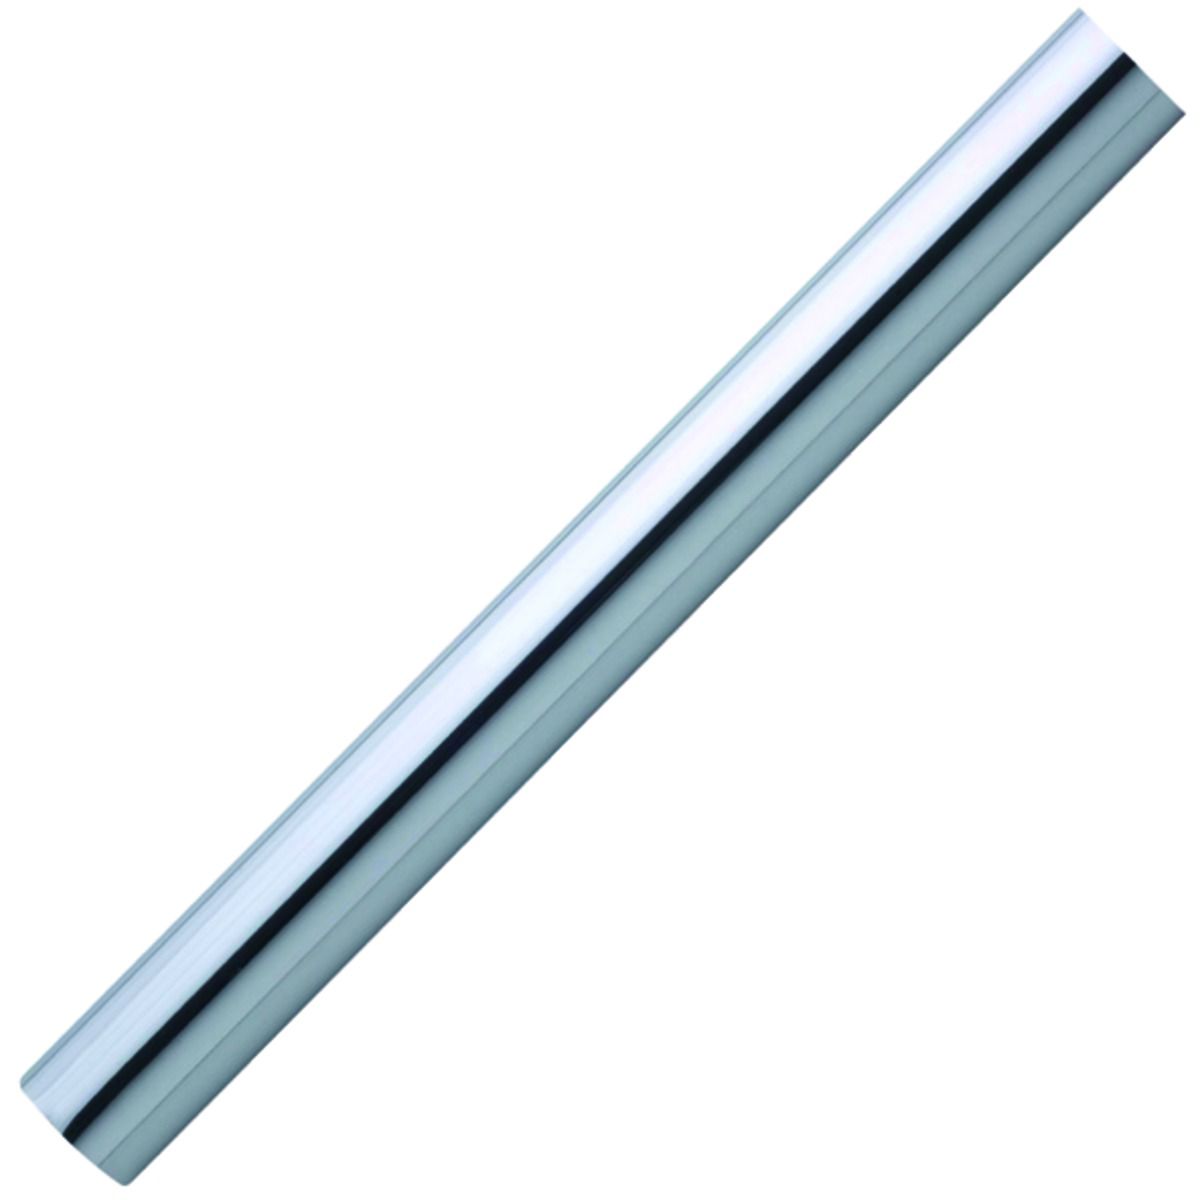 Image of Wickes Polished Chrome Handrail - 40mm x 2.4m